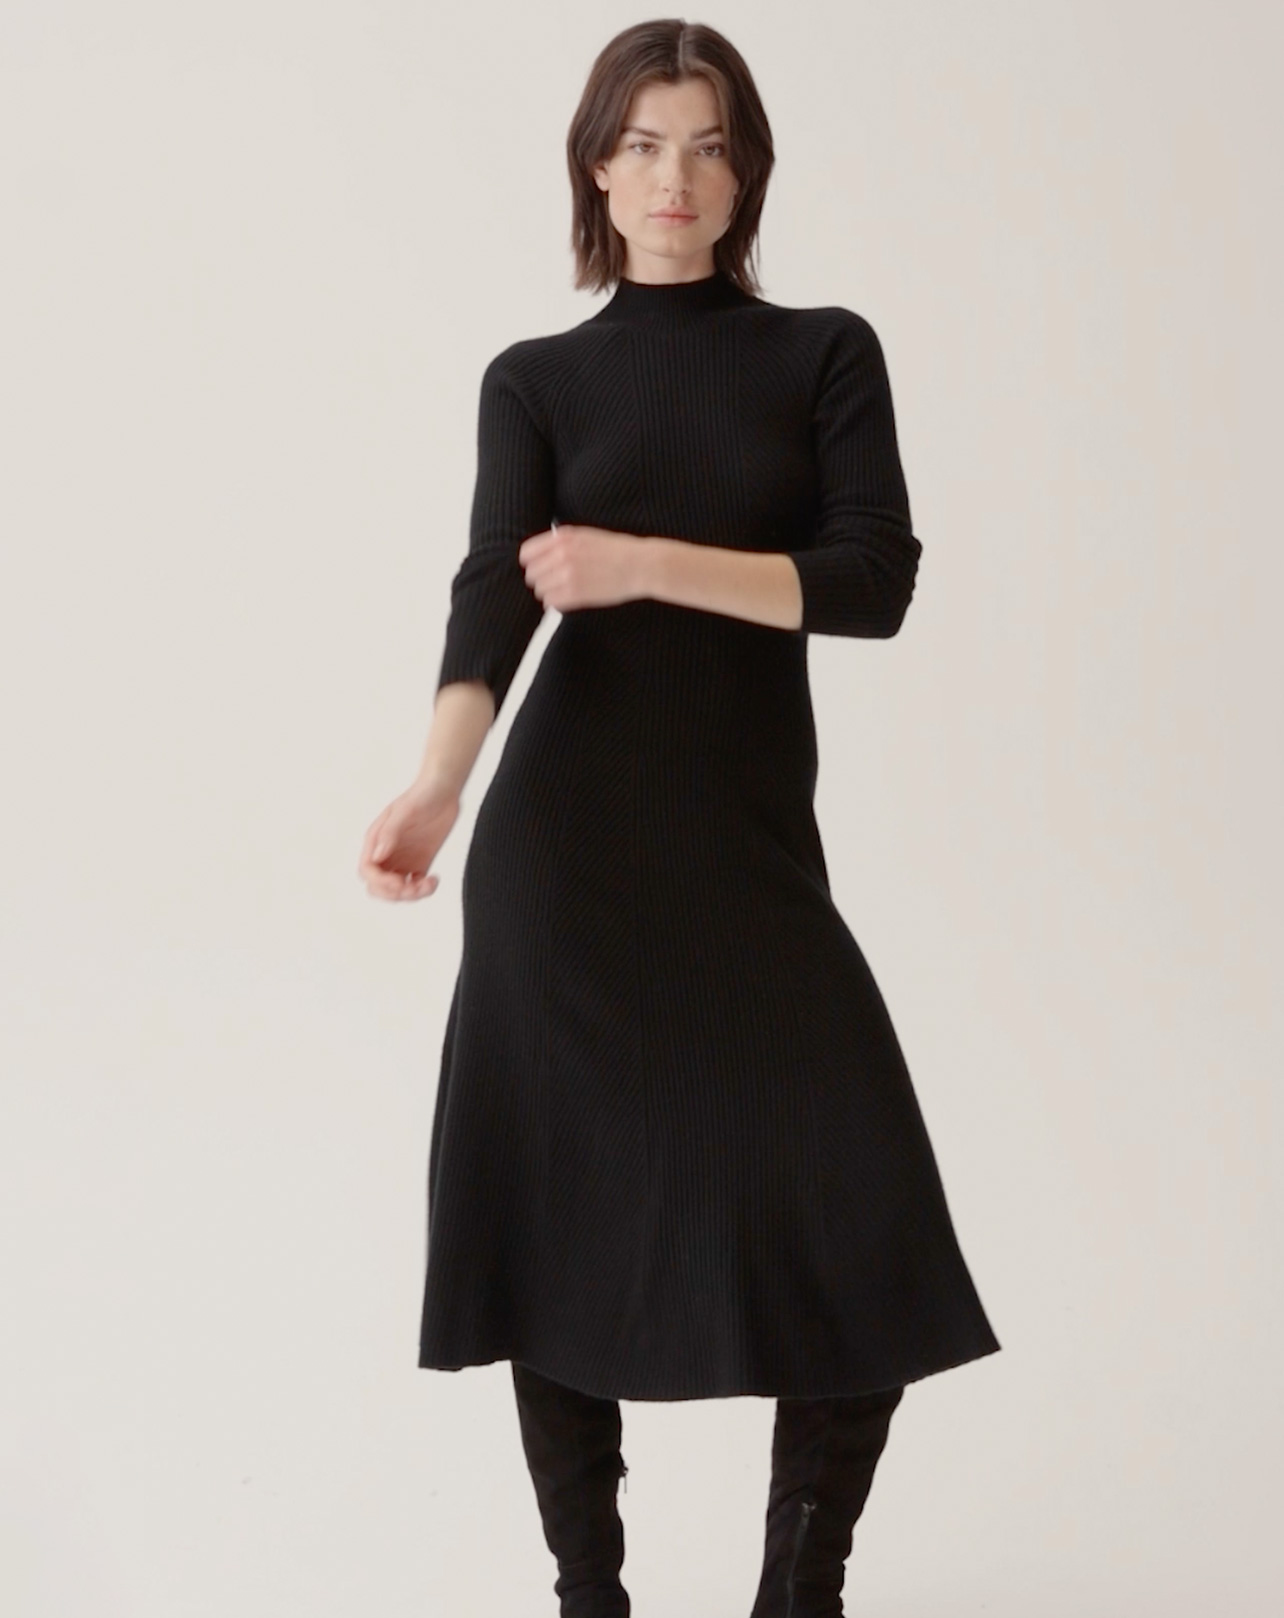 Women's Cashmere Dresses and skirts | Eric Bompard